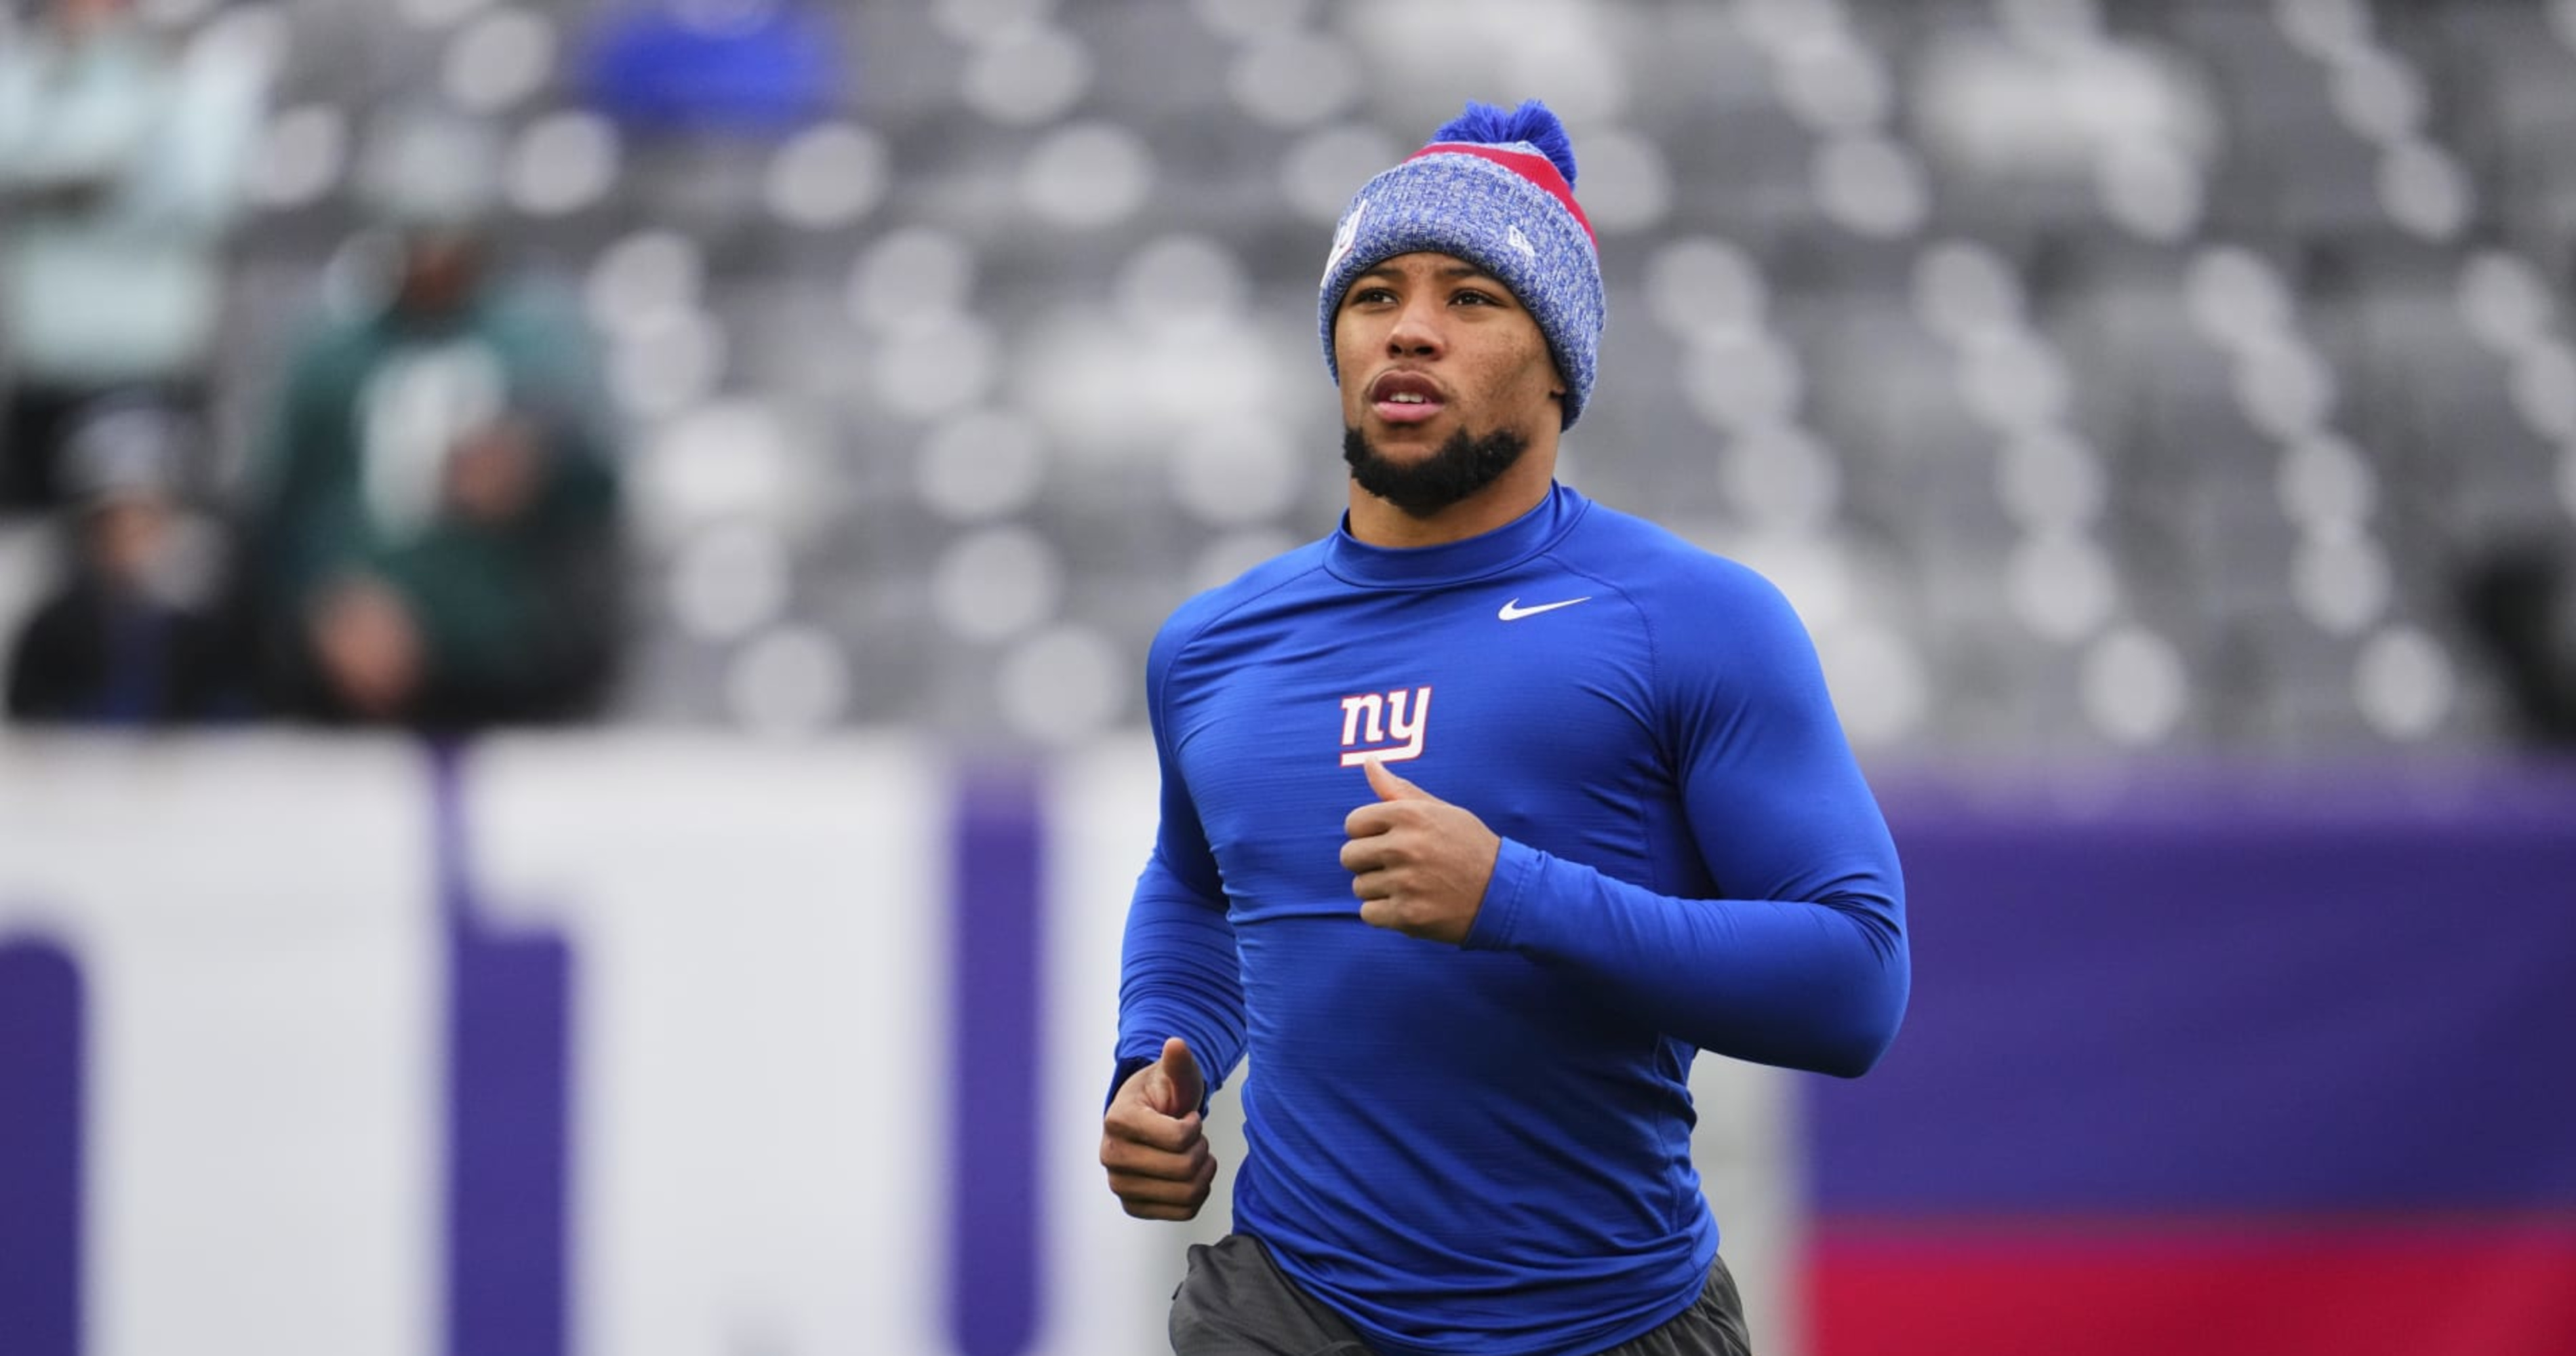 Saquon Barkley Calls Giants Contract Talks 'Disrespectful' and 'A Slap in the Face'